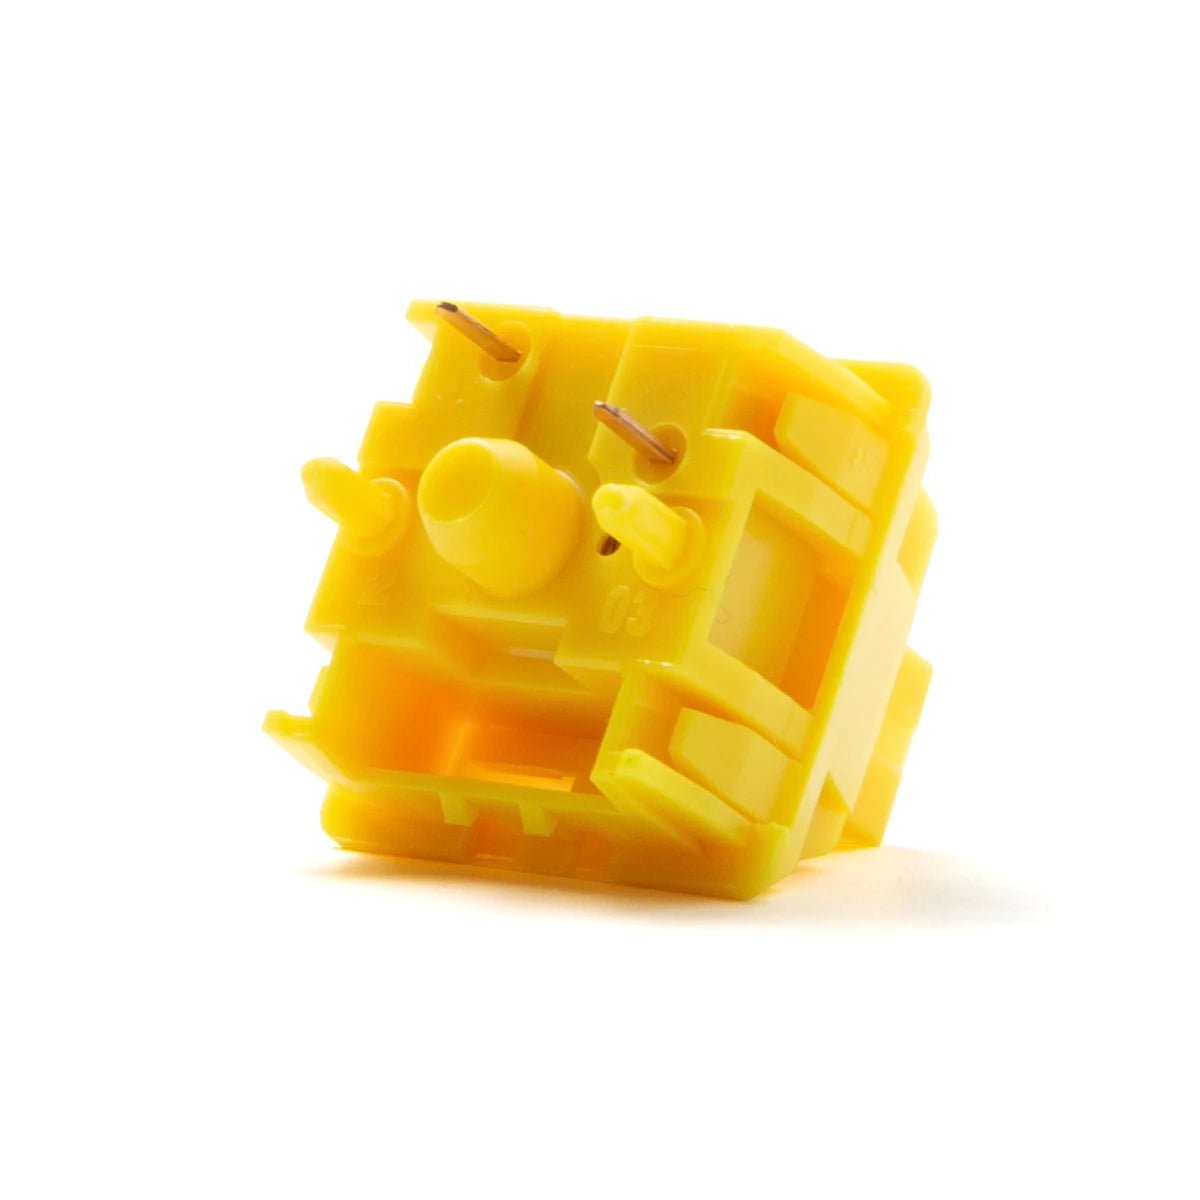 Haimu x Geon HG Yellow Silent Tactile Switches - Divinikey